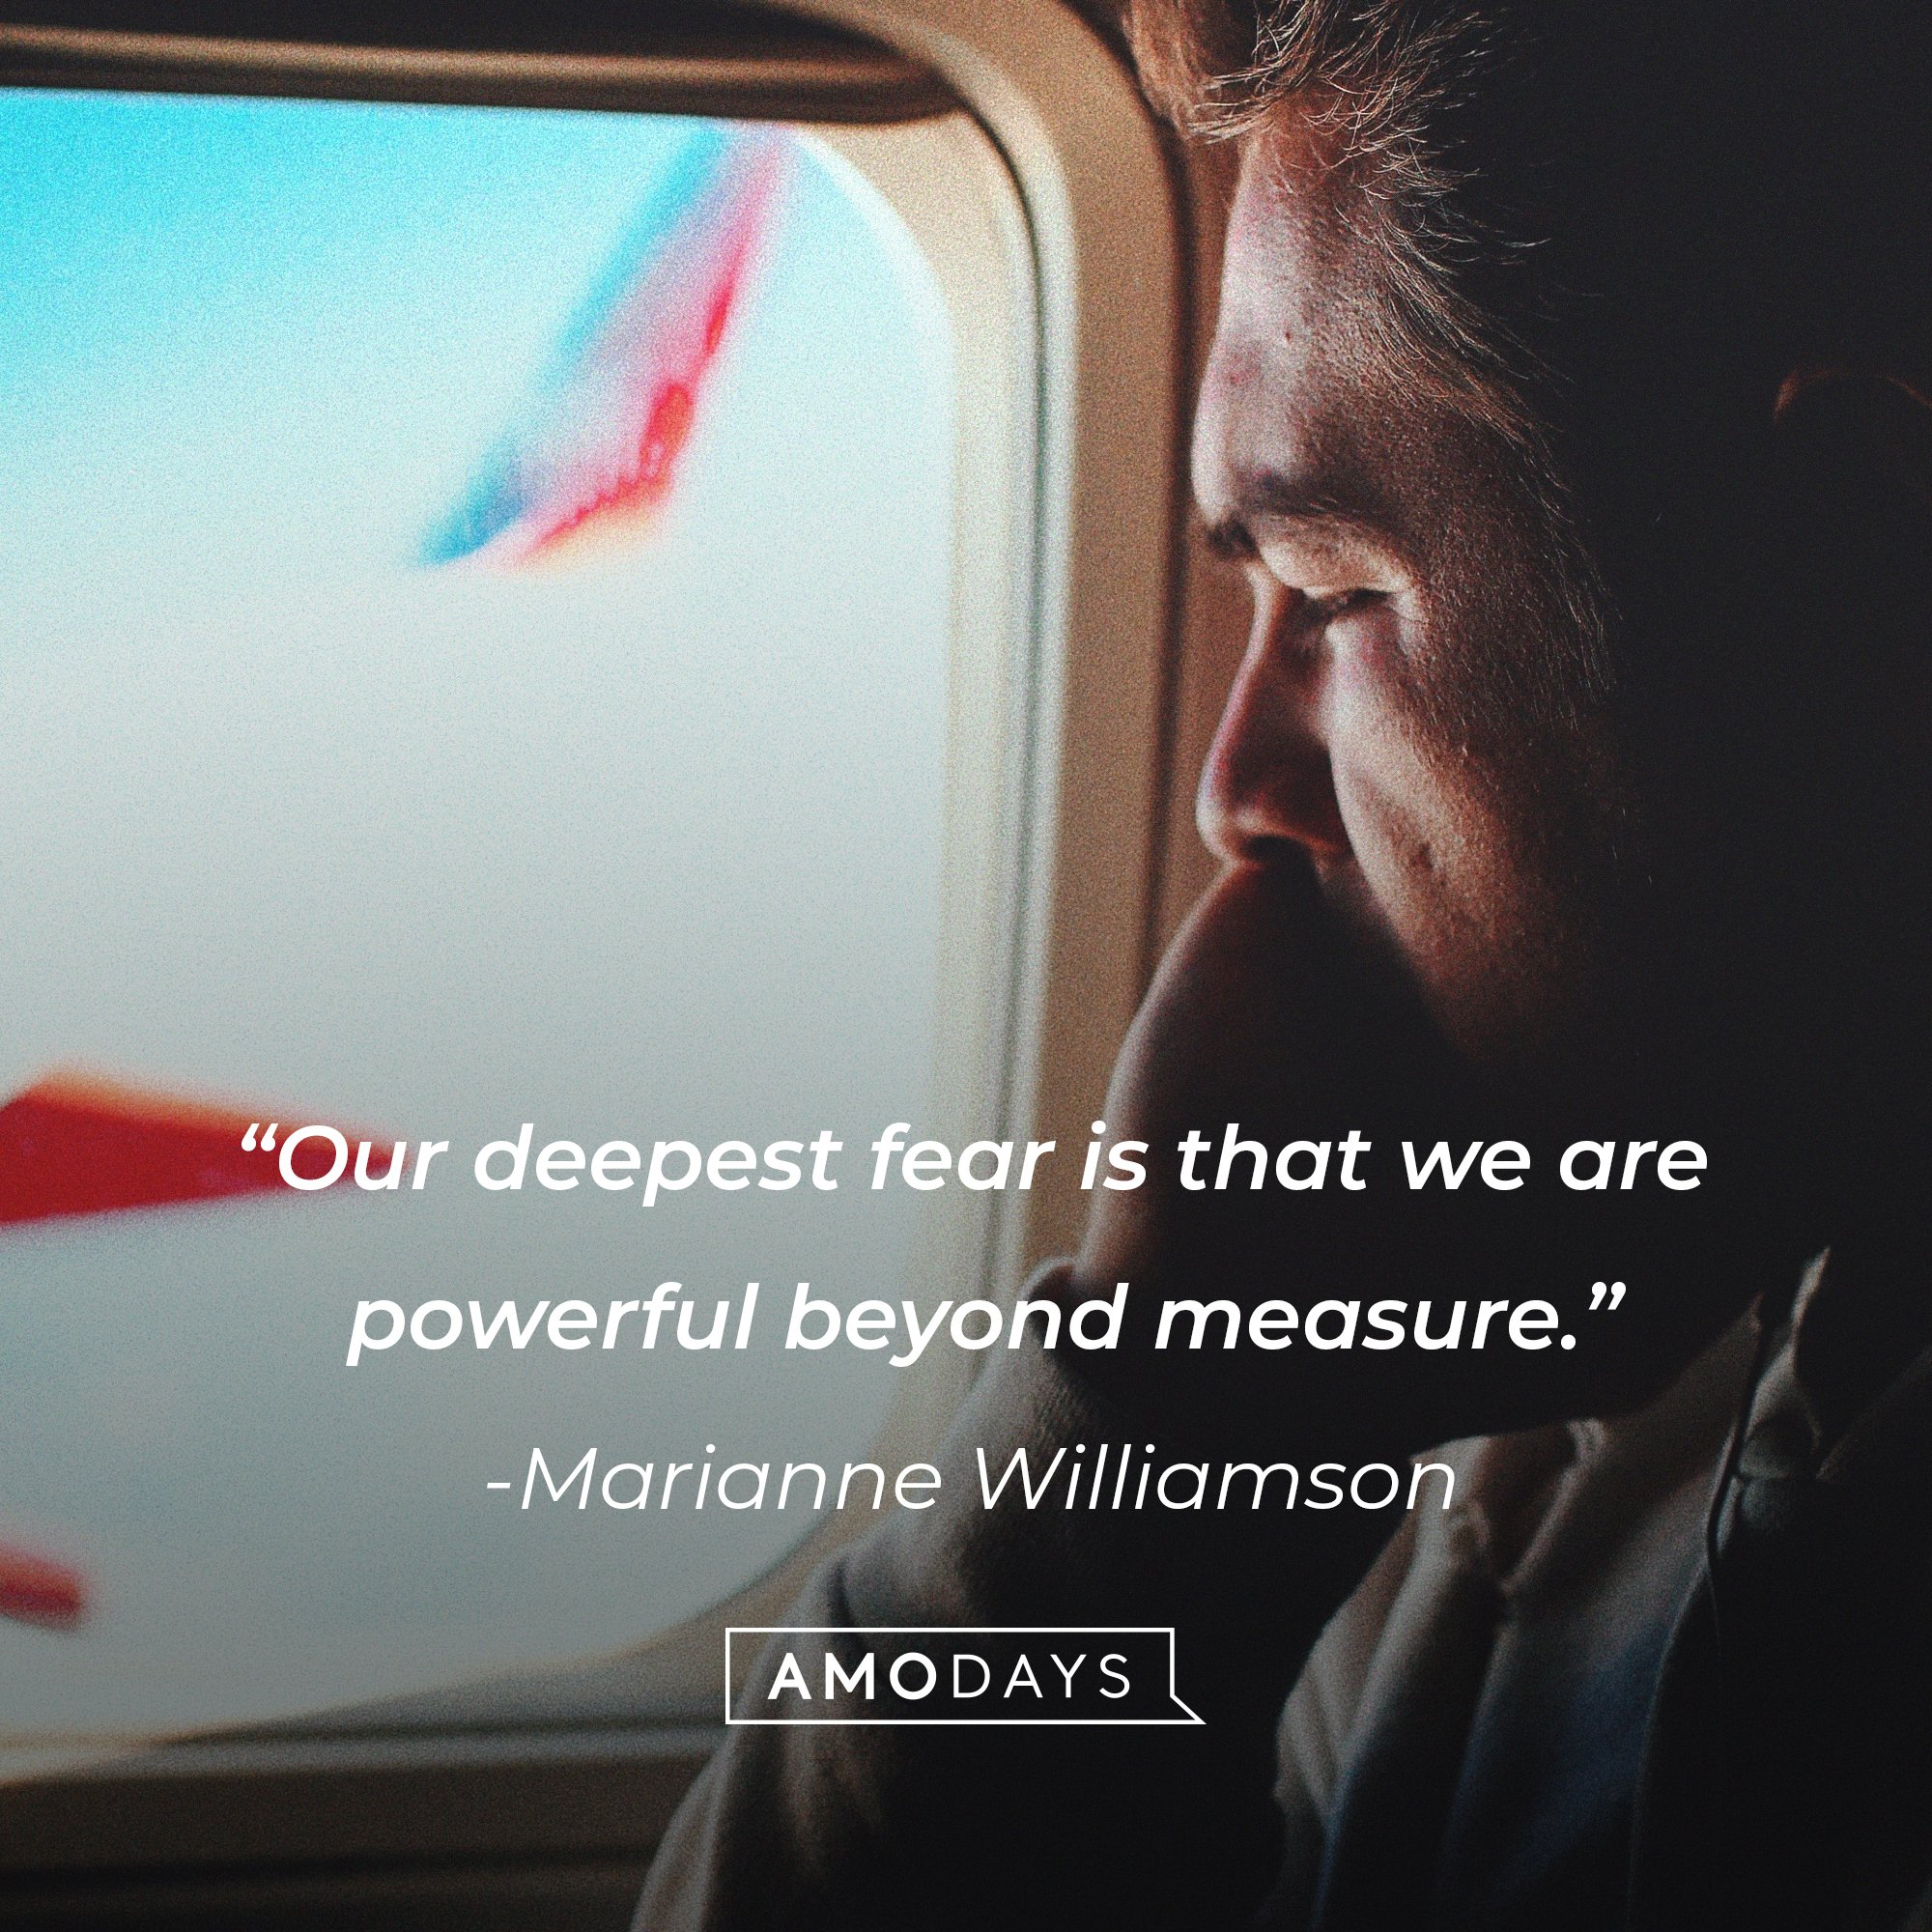 Marianne Williamson's quote: “Our deepest fear is that we are powerful beyond measure.” | Image: AmoDays